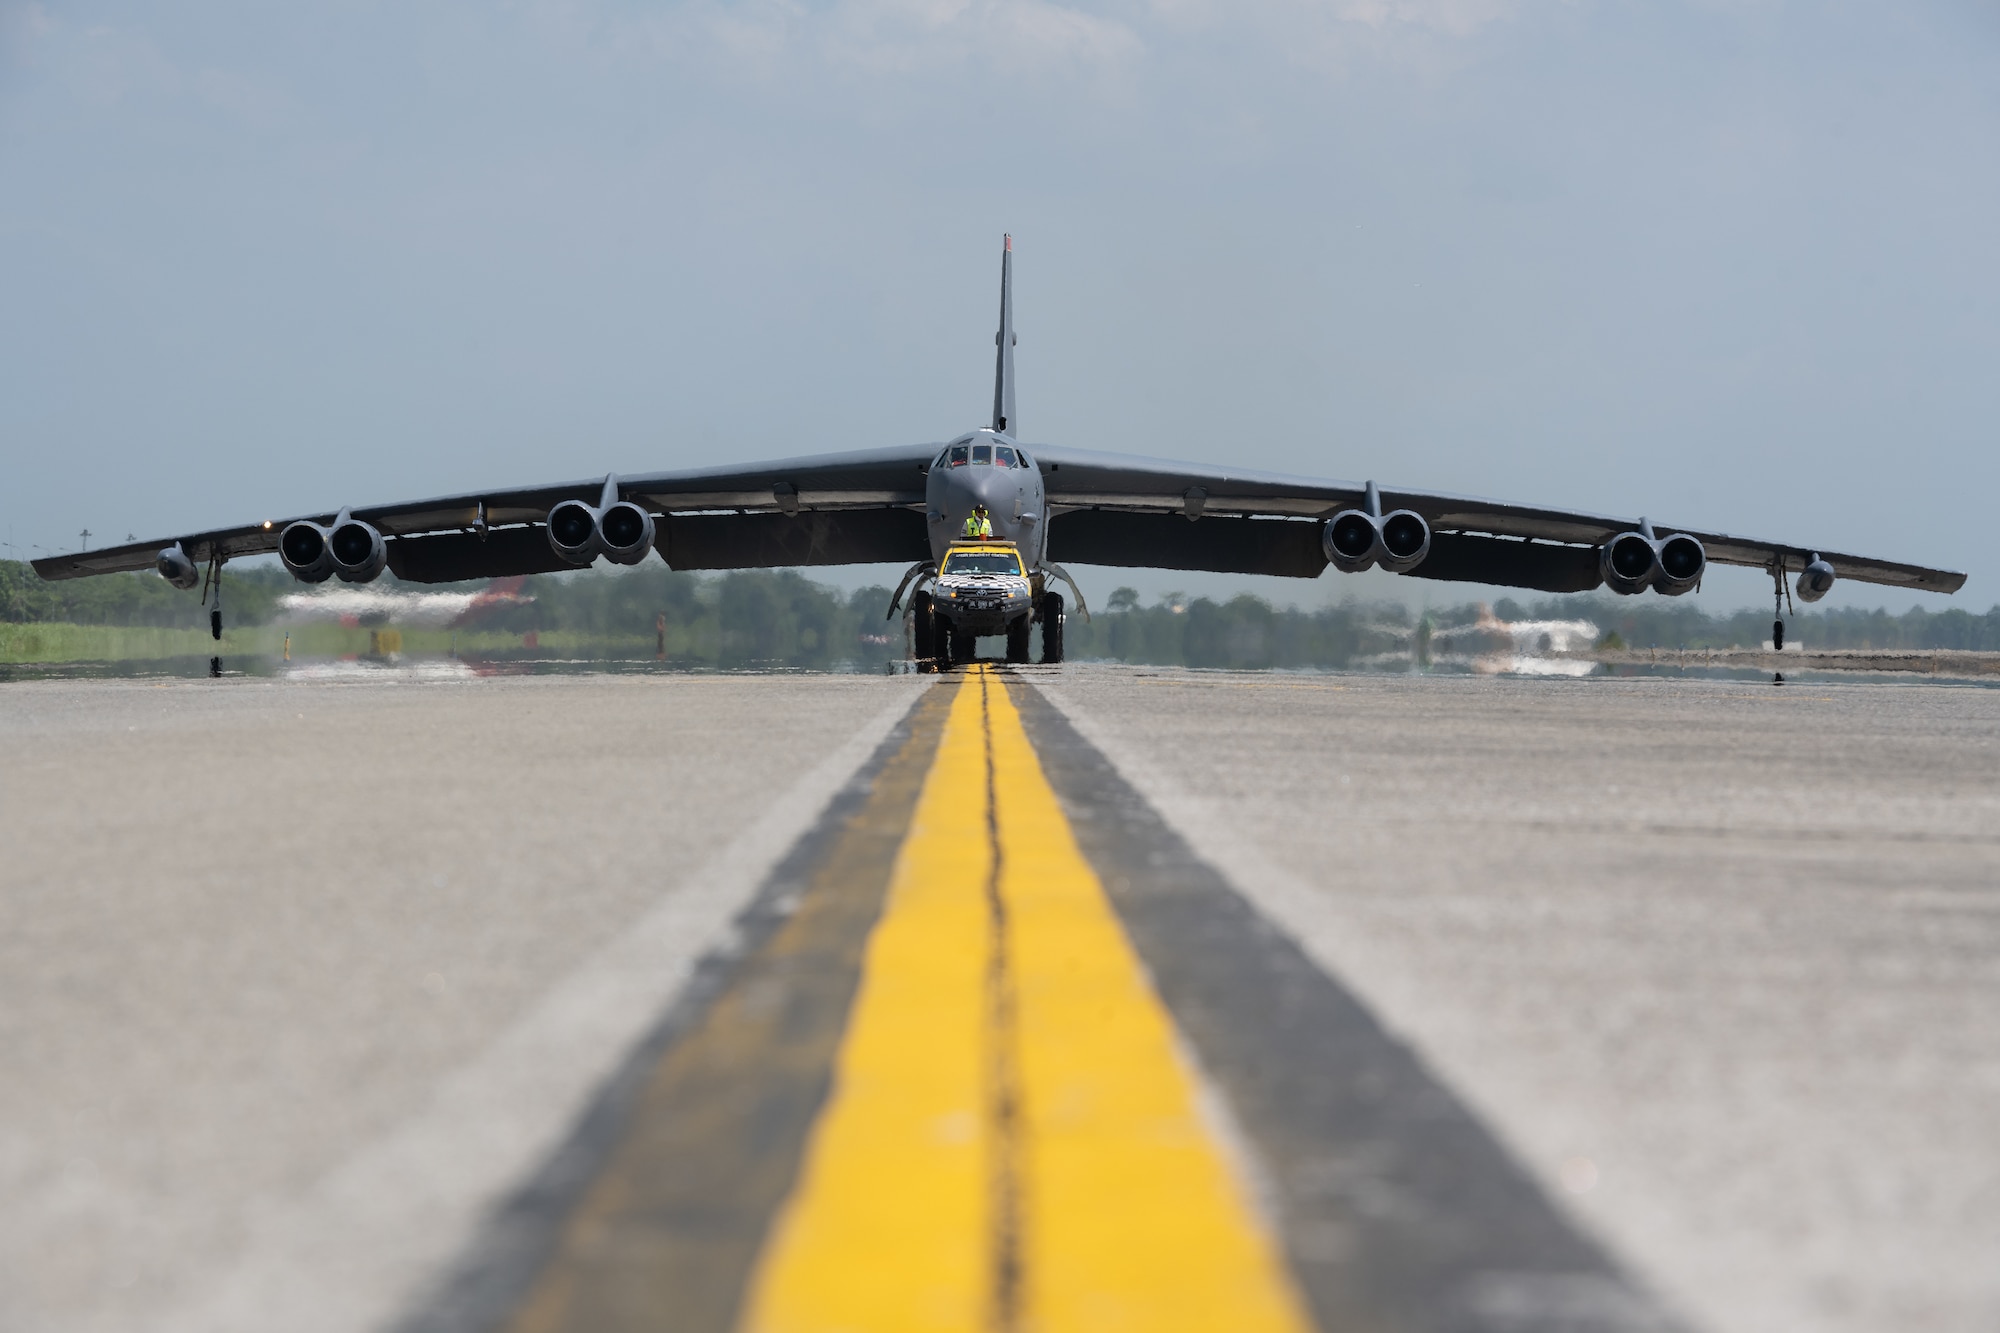 A U.S. Air Force B-52H Stratofortress assigned to the 23rd Bomb Squadron at Minot Air Force Base, North Dakota, sits on the flightline as another prepares to land at the Kualanamu International Airport in Medan, Indonesia, June 19, 2023. Two B-52s arrived in Indonesia to participate in bilateral training exercises, marking the first time U.S. Air Force B-52s had landed on Indonesian soil. (U.S. Air Force photo by Tech. Sgt. Zade Vadnais)